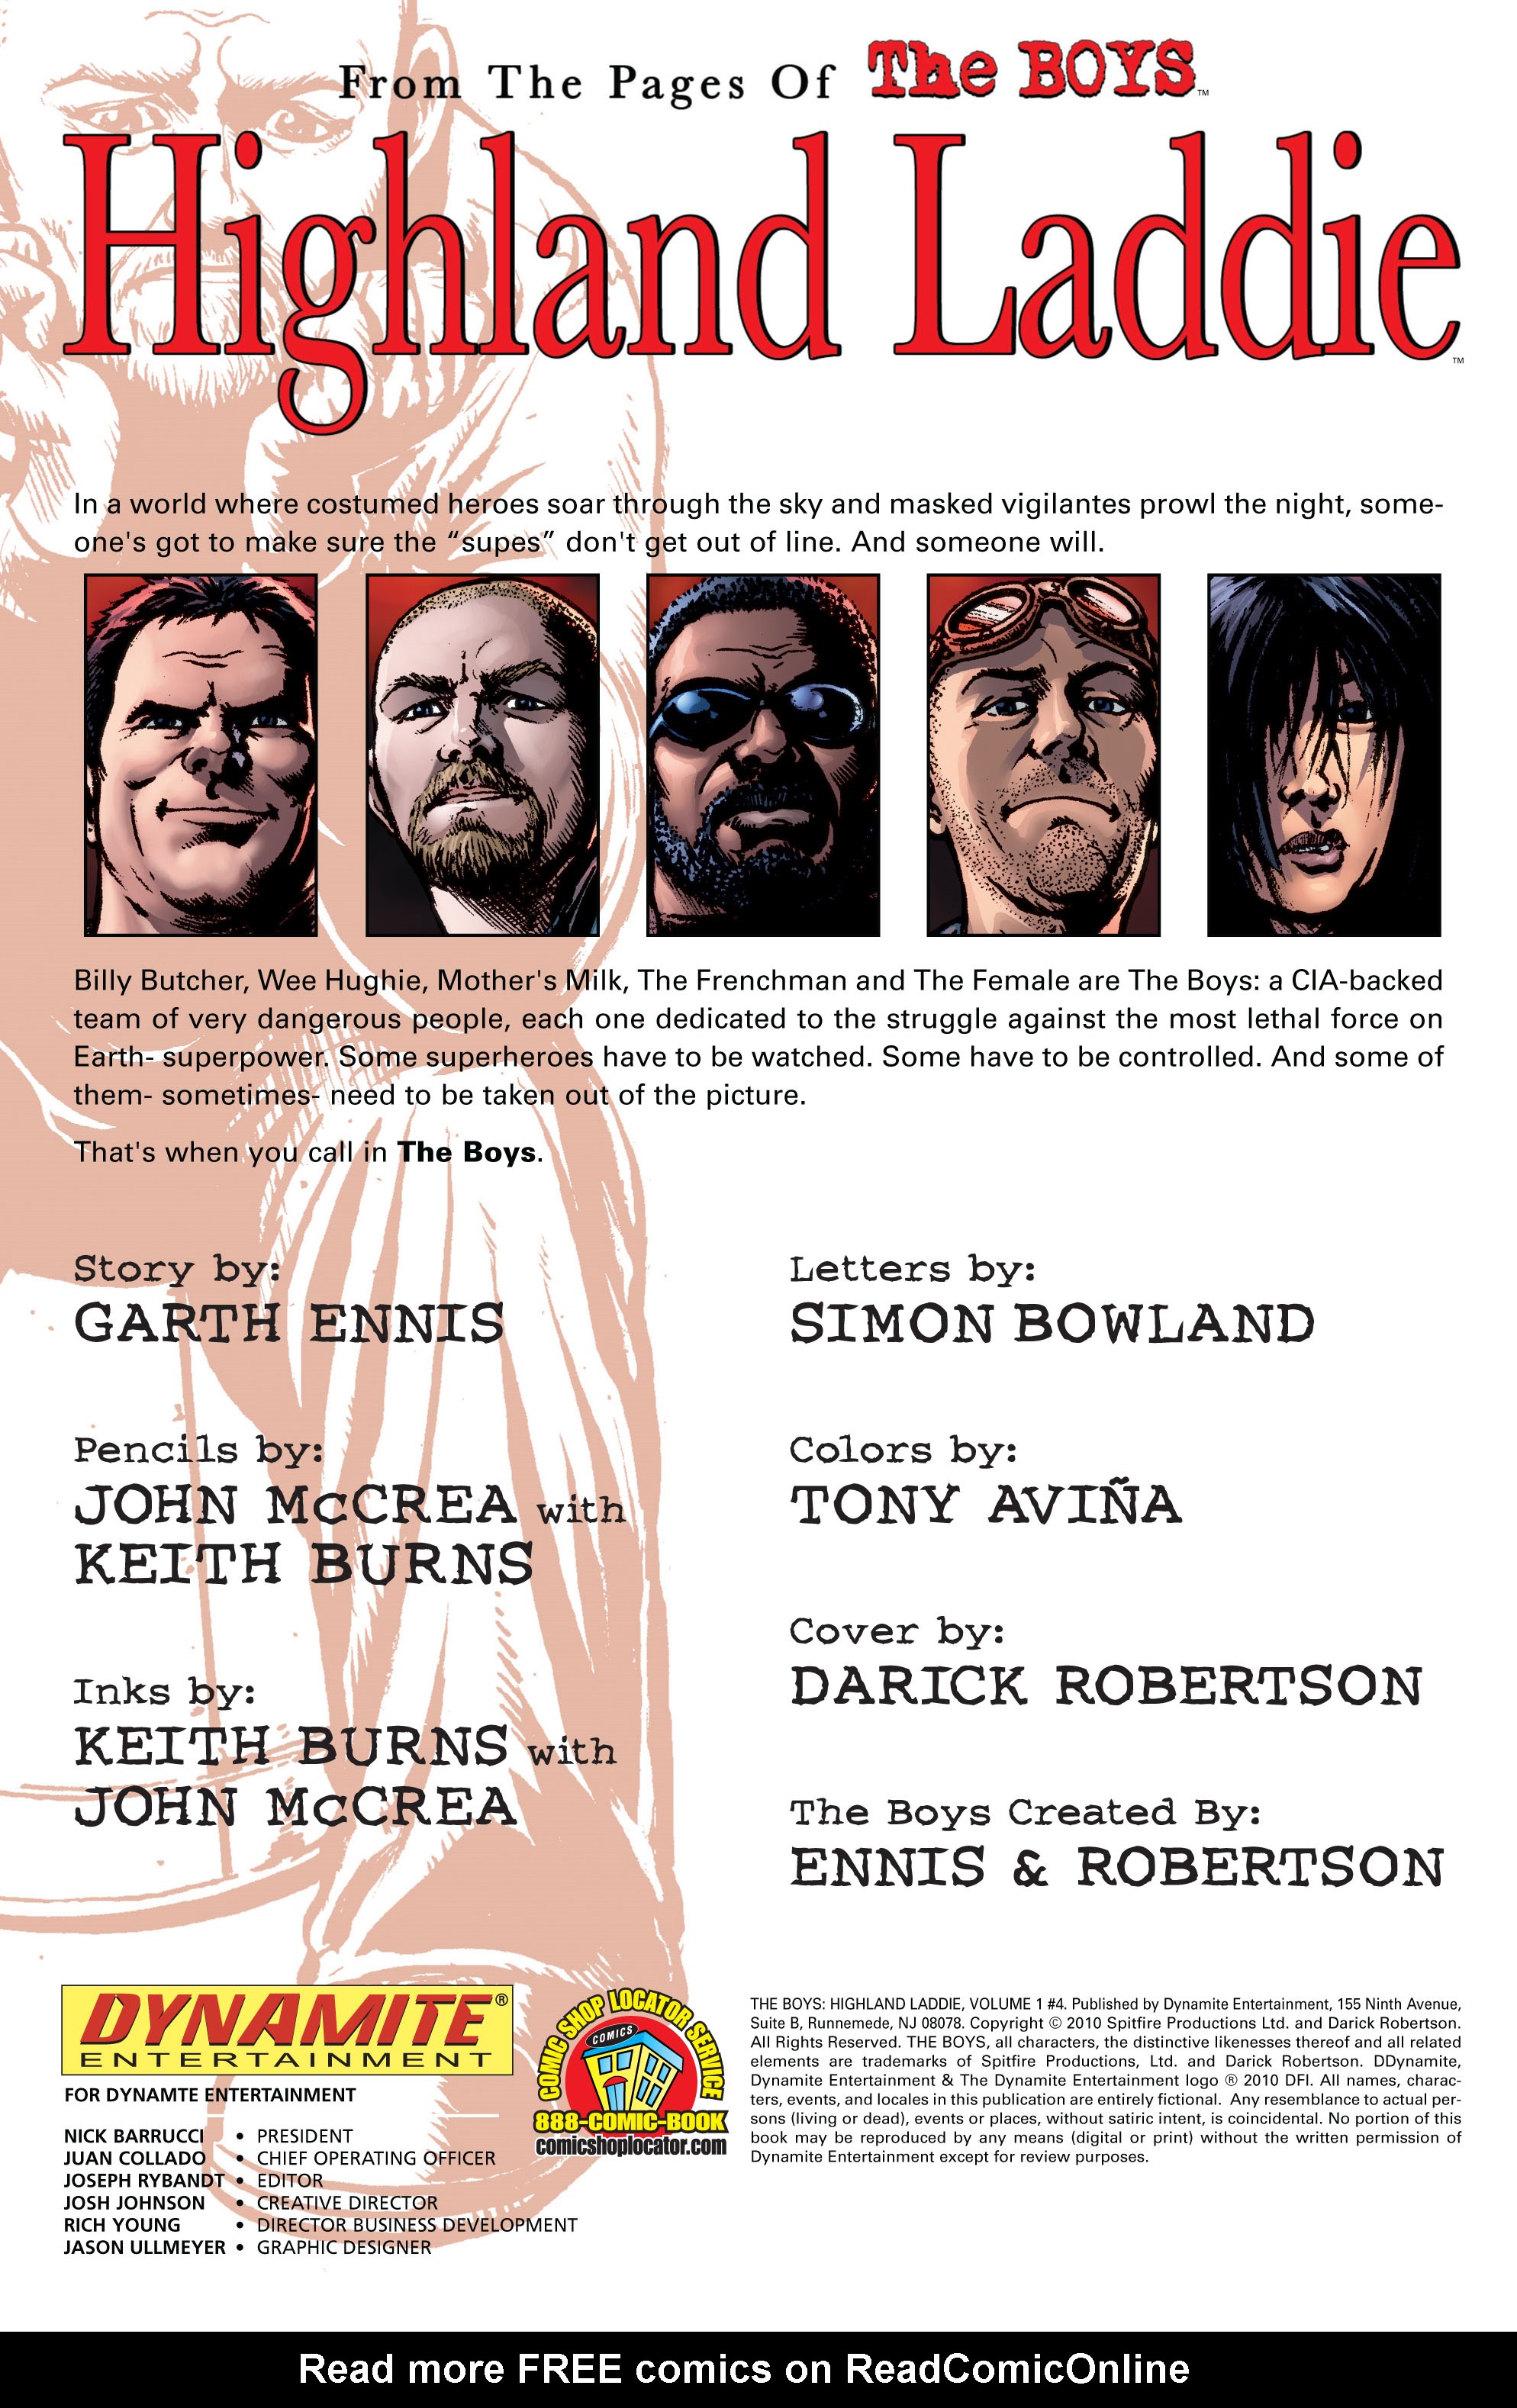 Read online The Boys: Highland Laddie comic -  Issue # TPB - 75